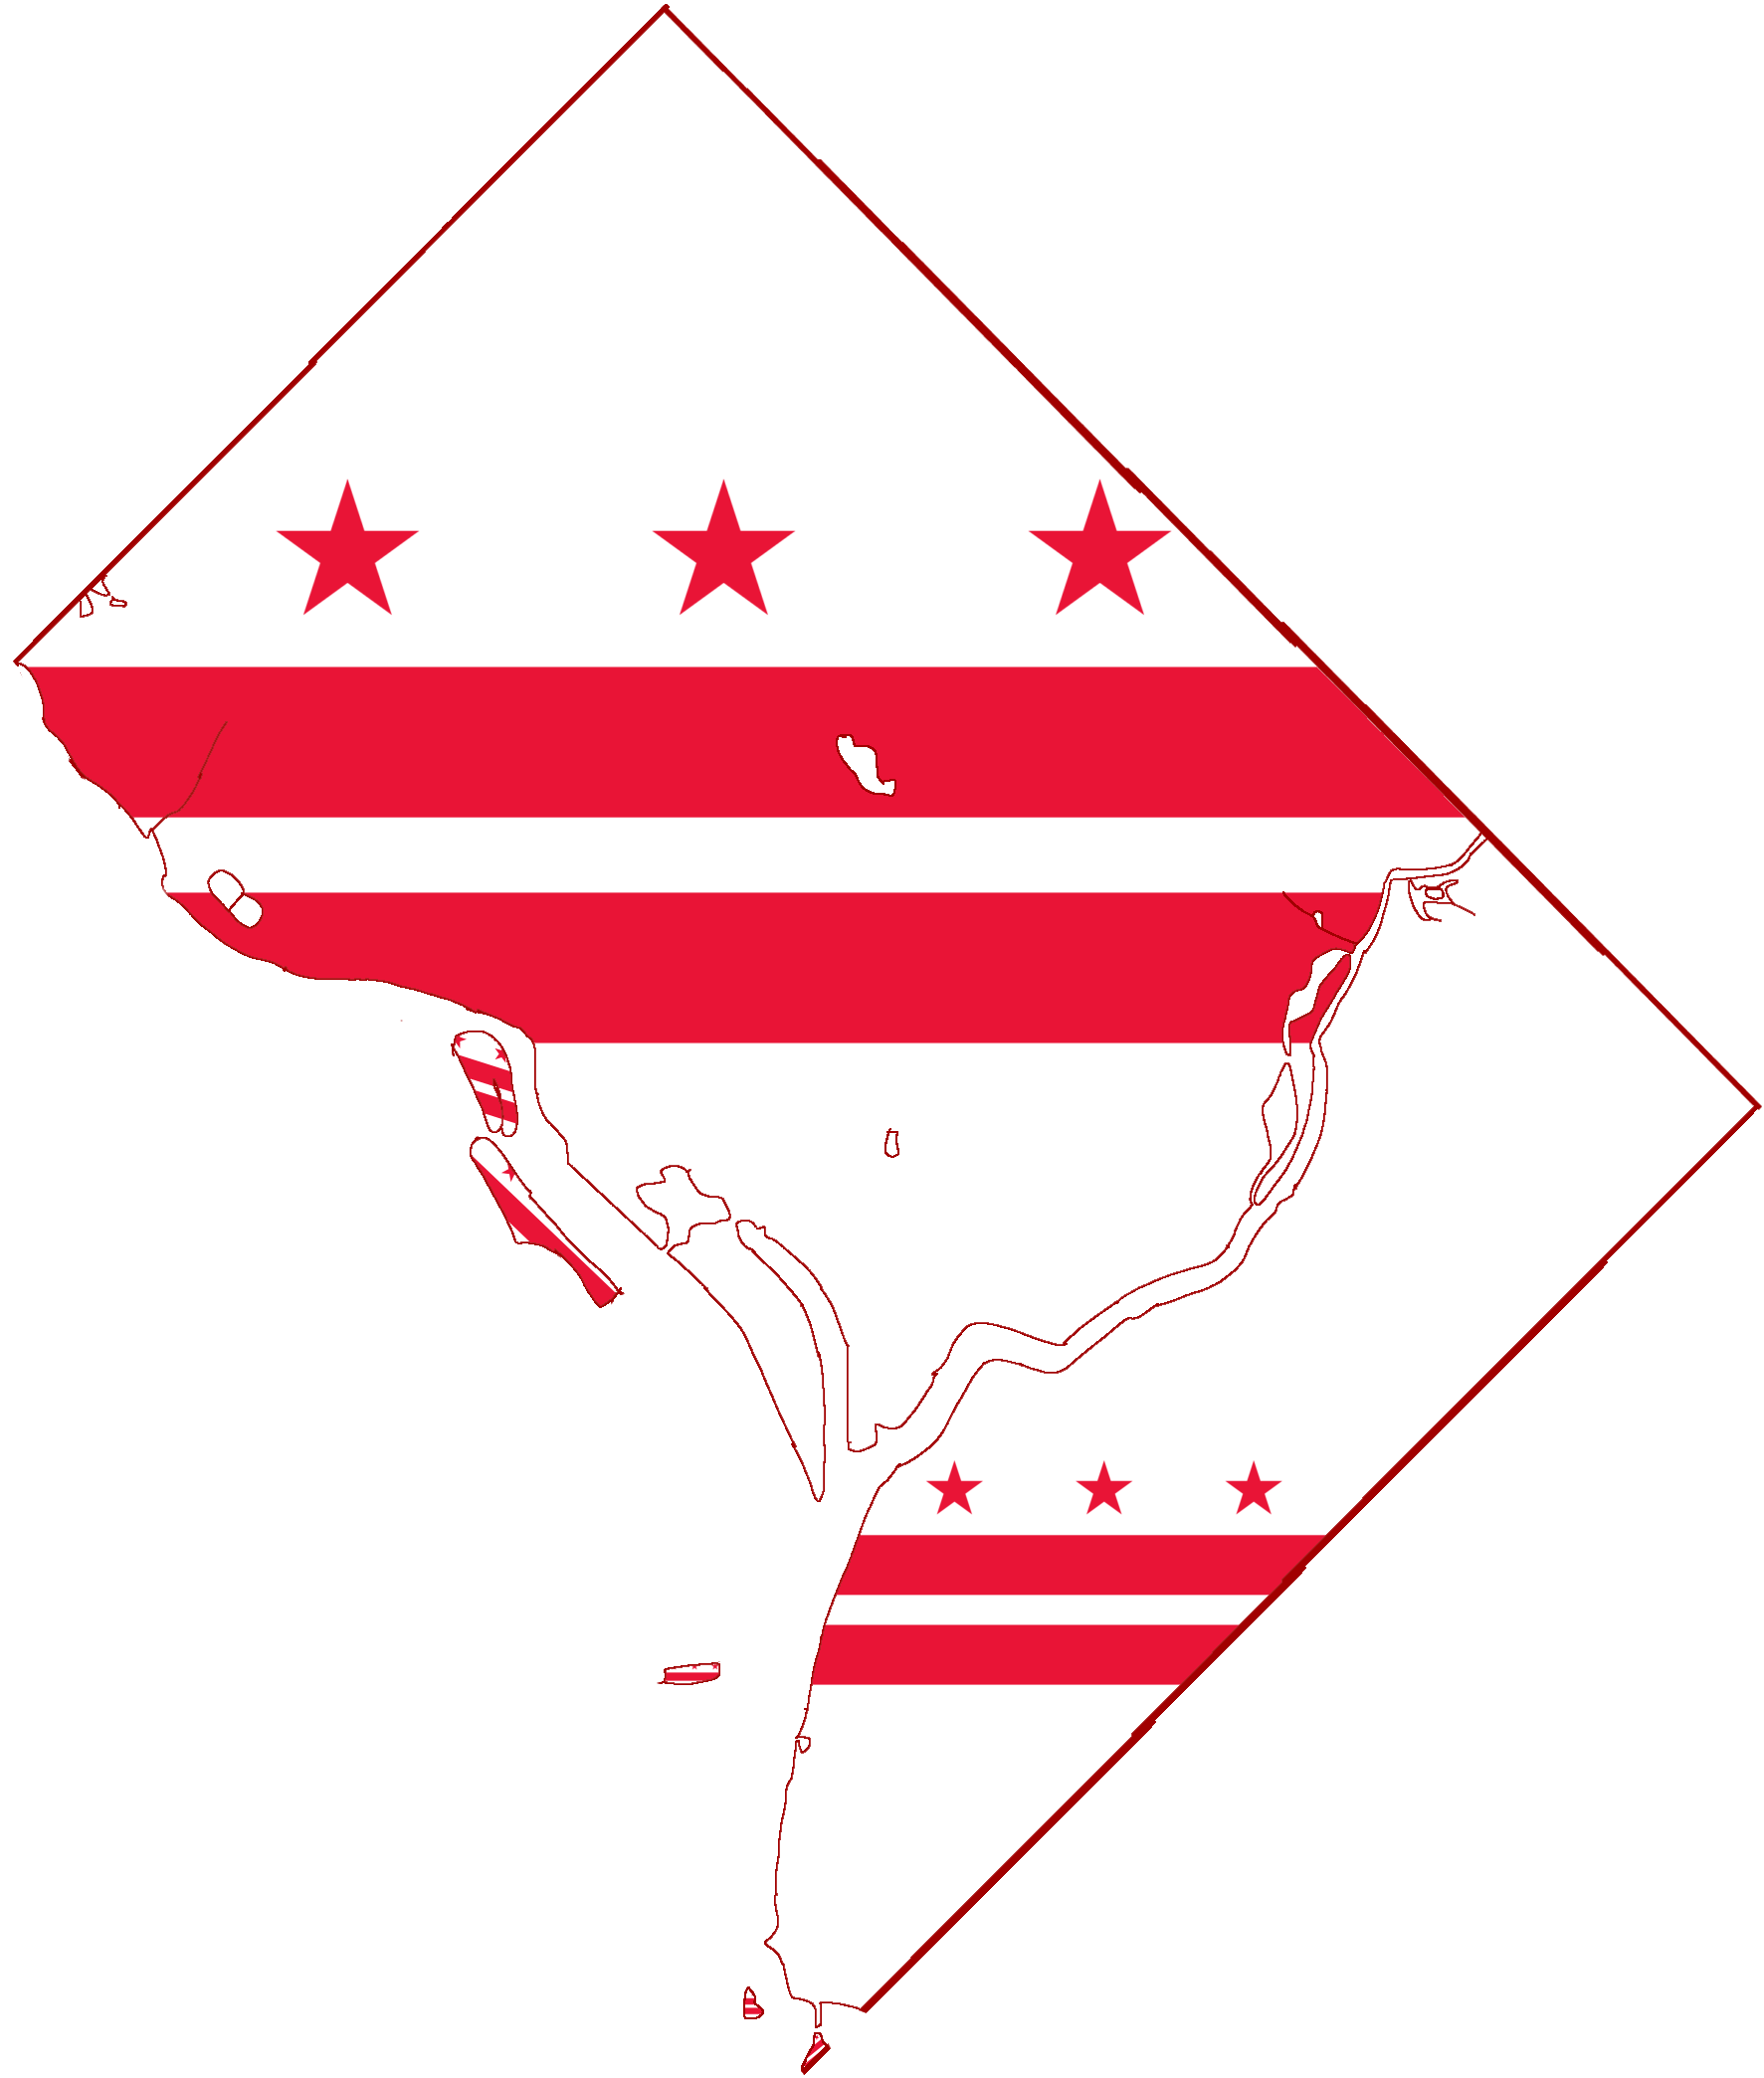 Outline of a map of DC filled with the design of the DC flag